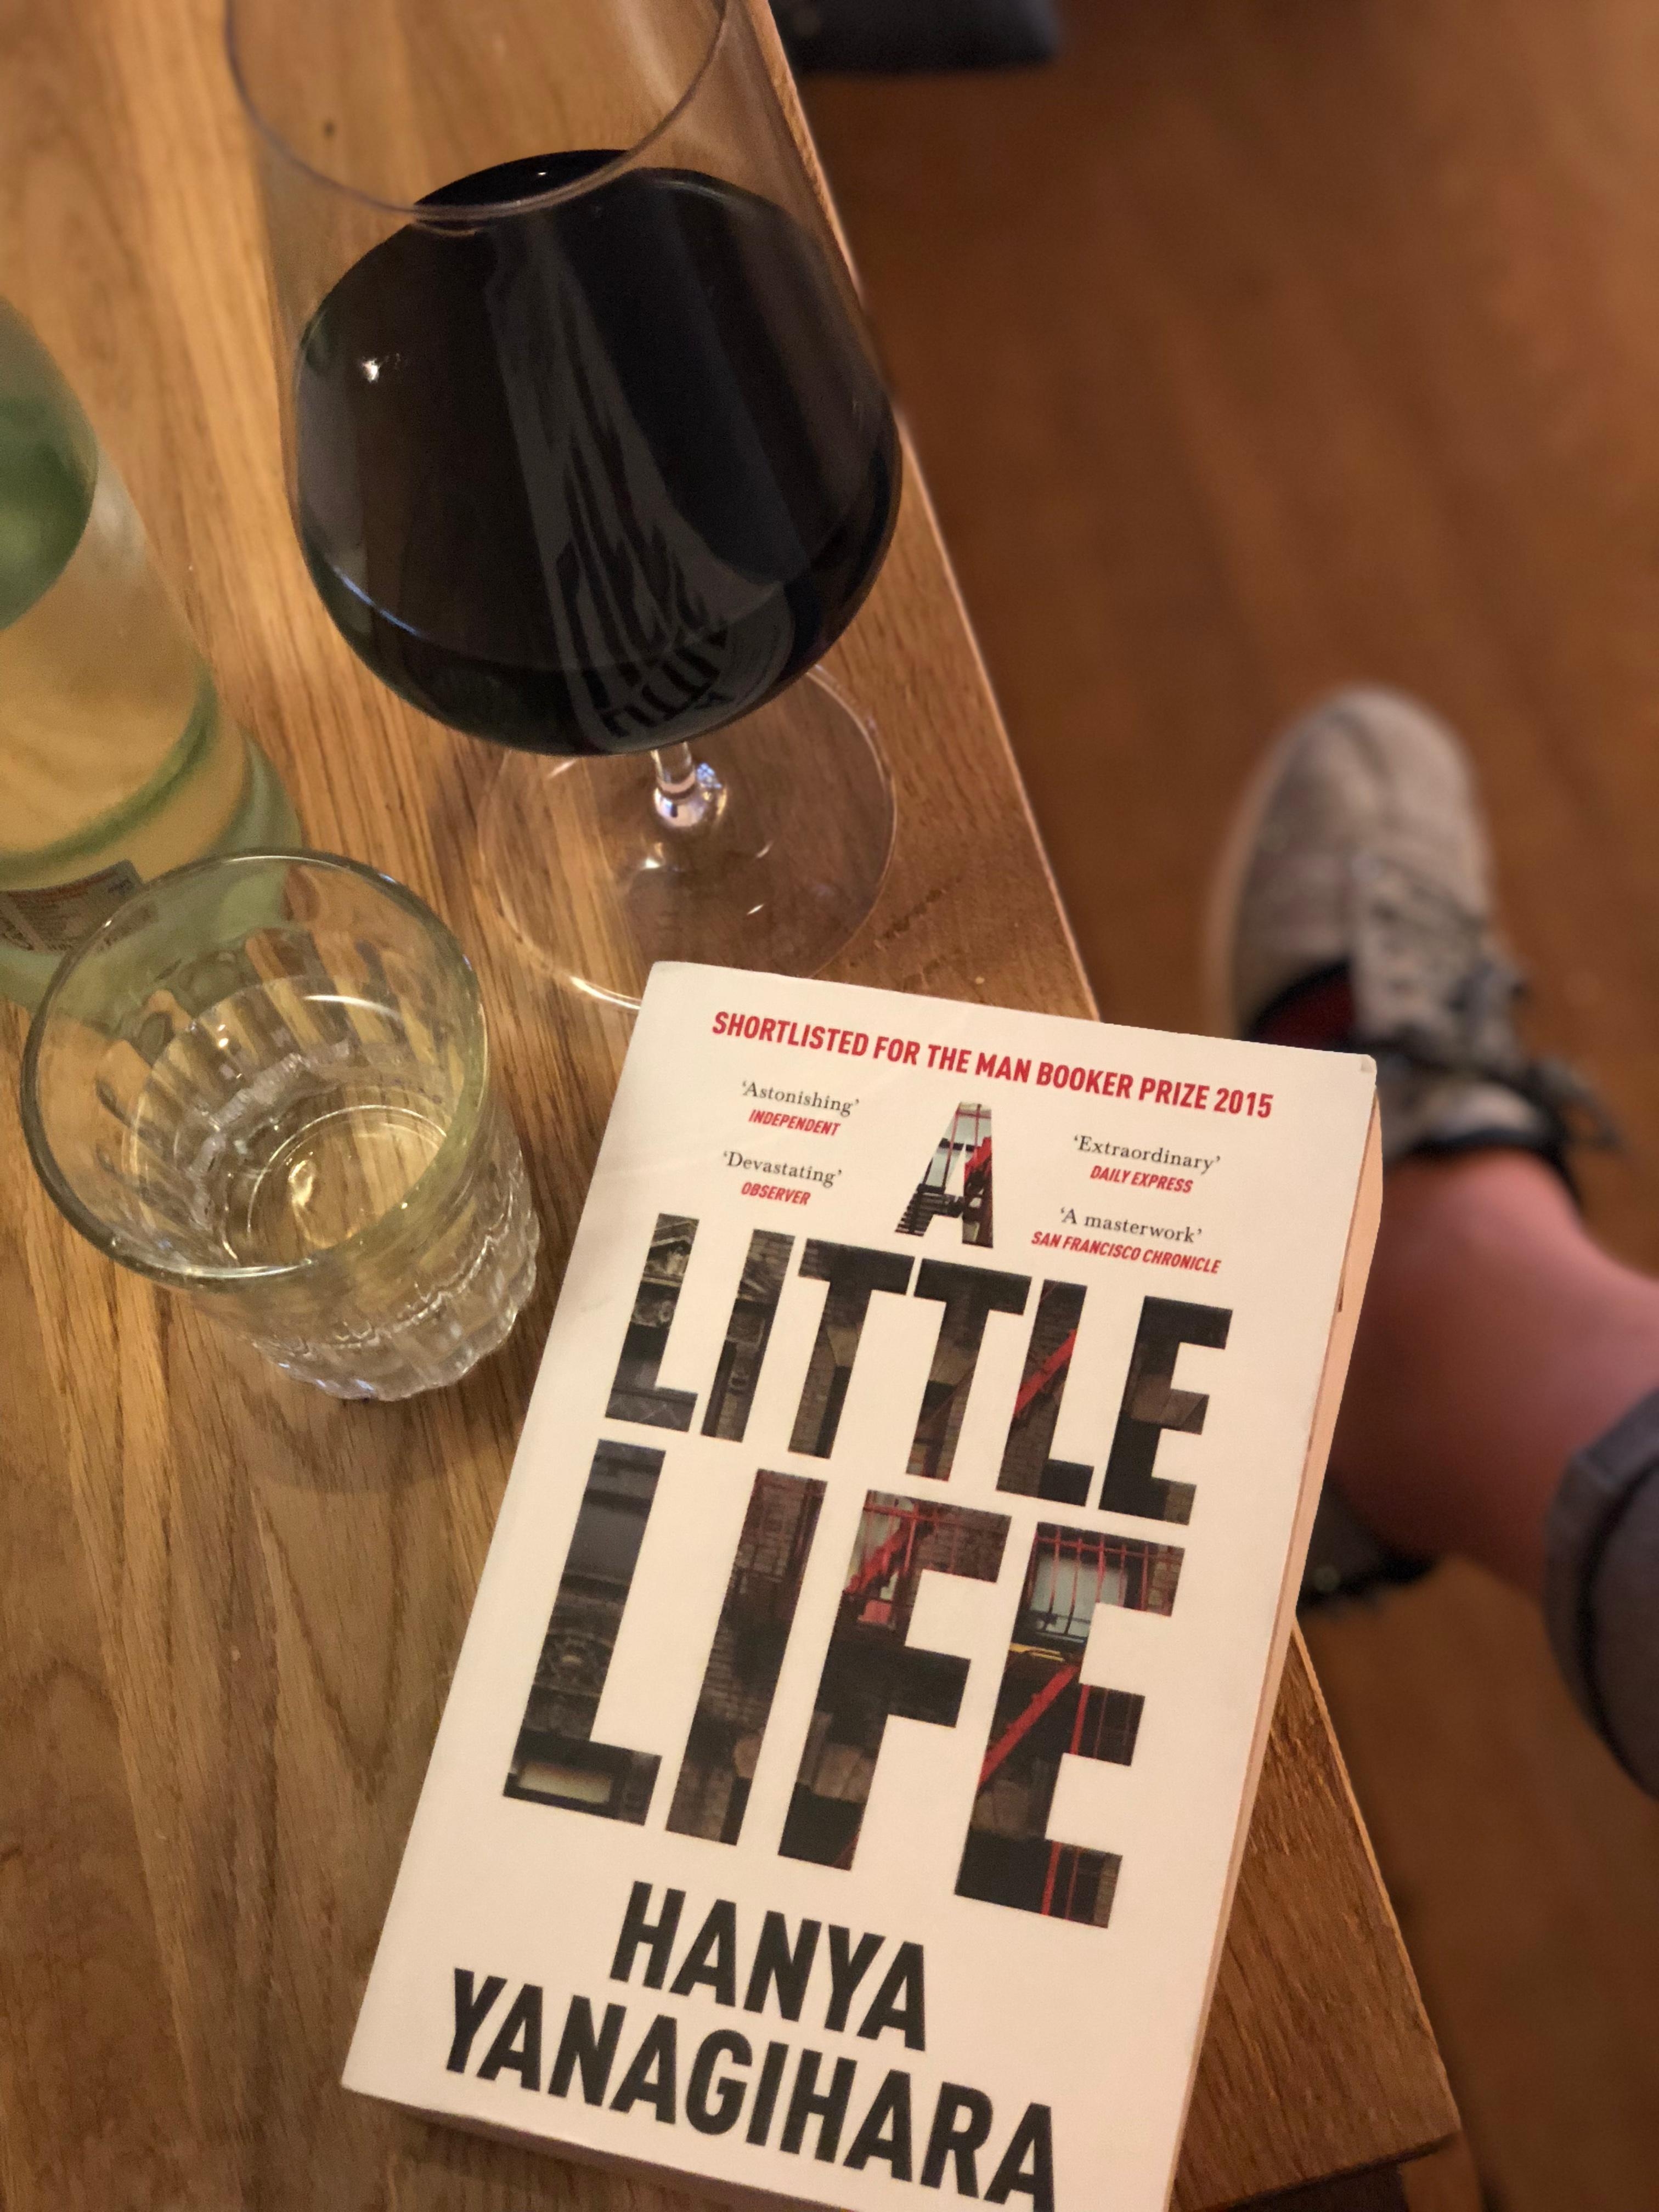 Weekends are for fabulous books and red wine. #books #reading #weekend #travel #city #alittlelife #wine